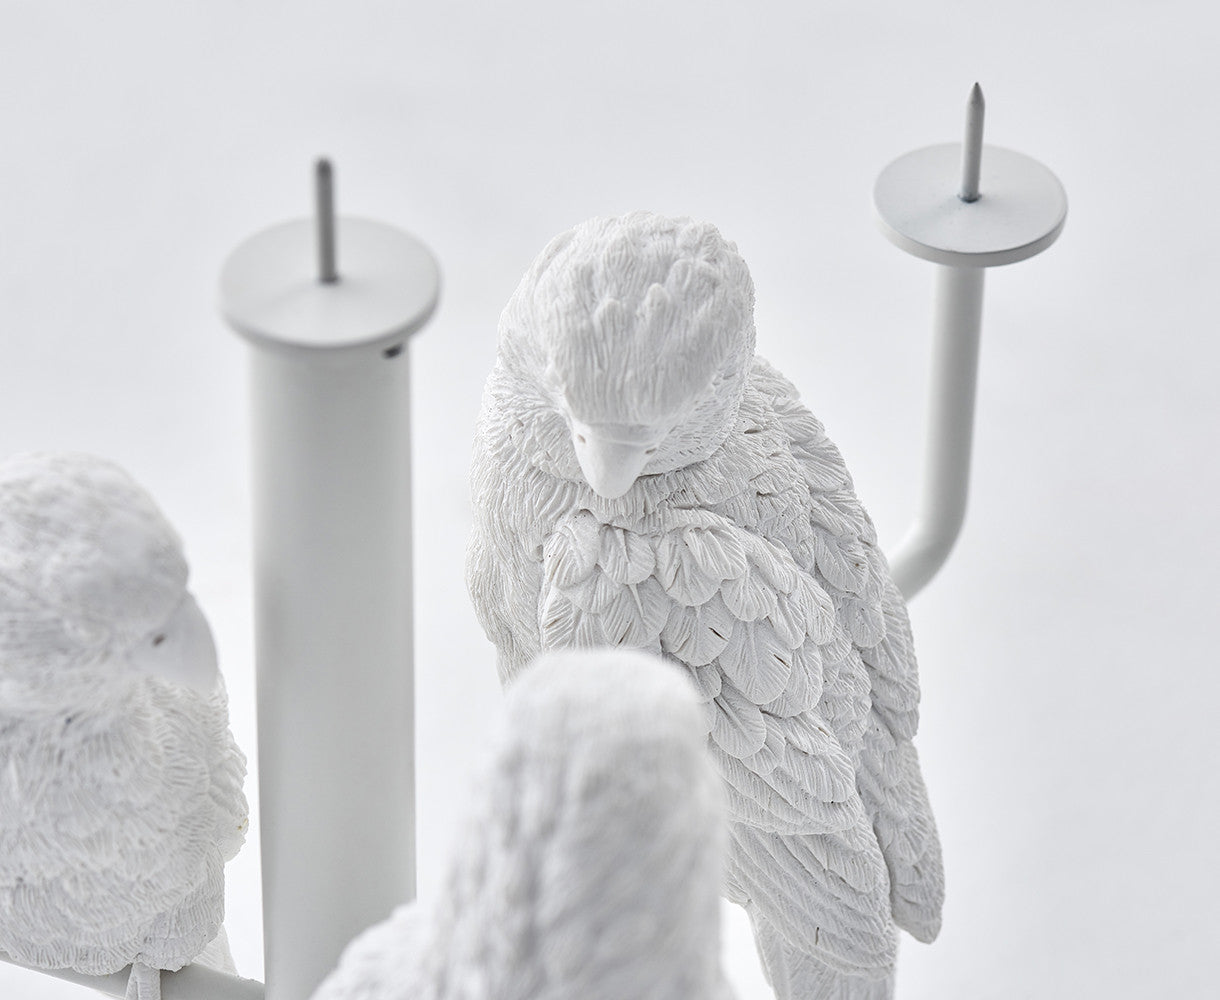 Parrot X CANDLE HOLDER - 4 Parrots by Haoshi Design